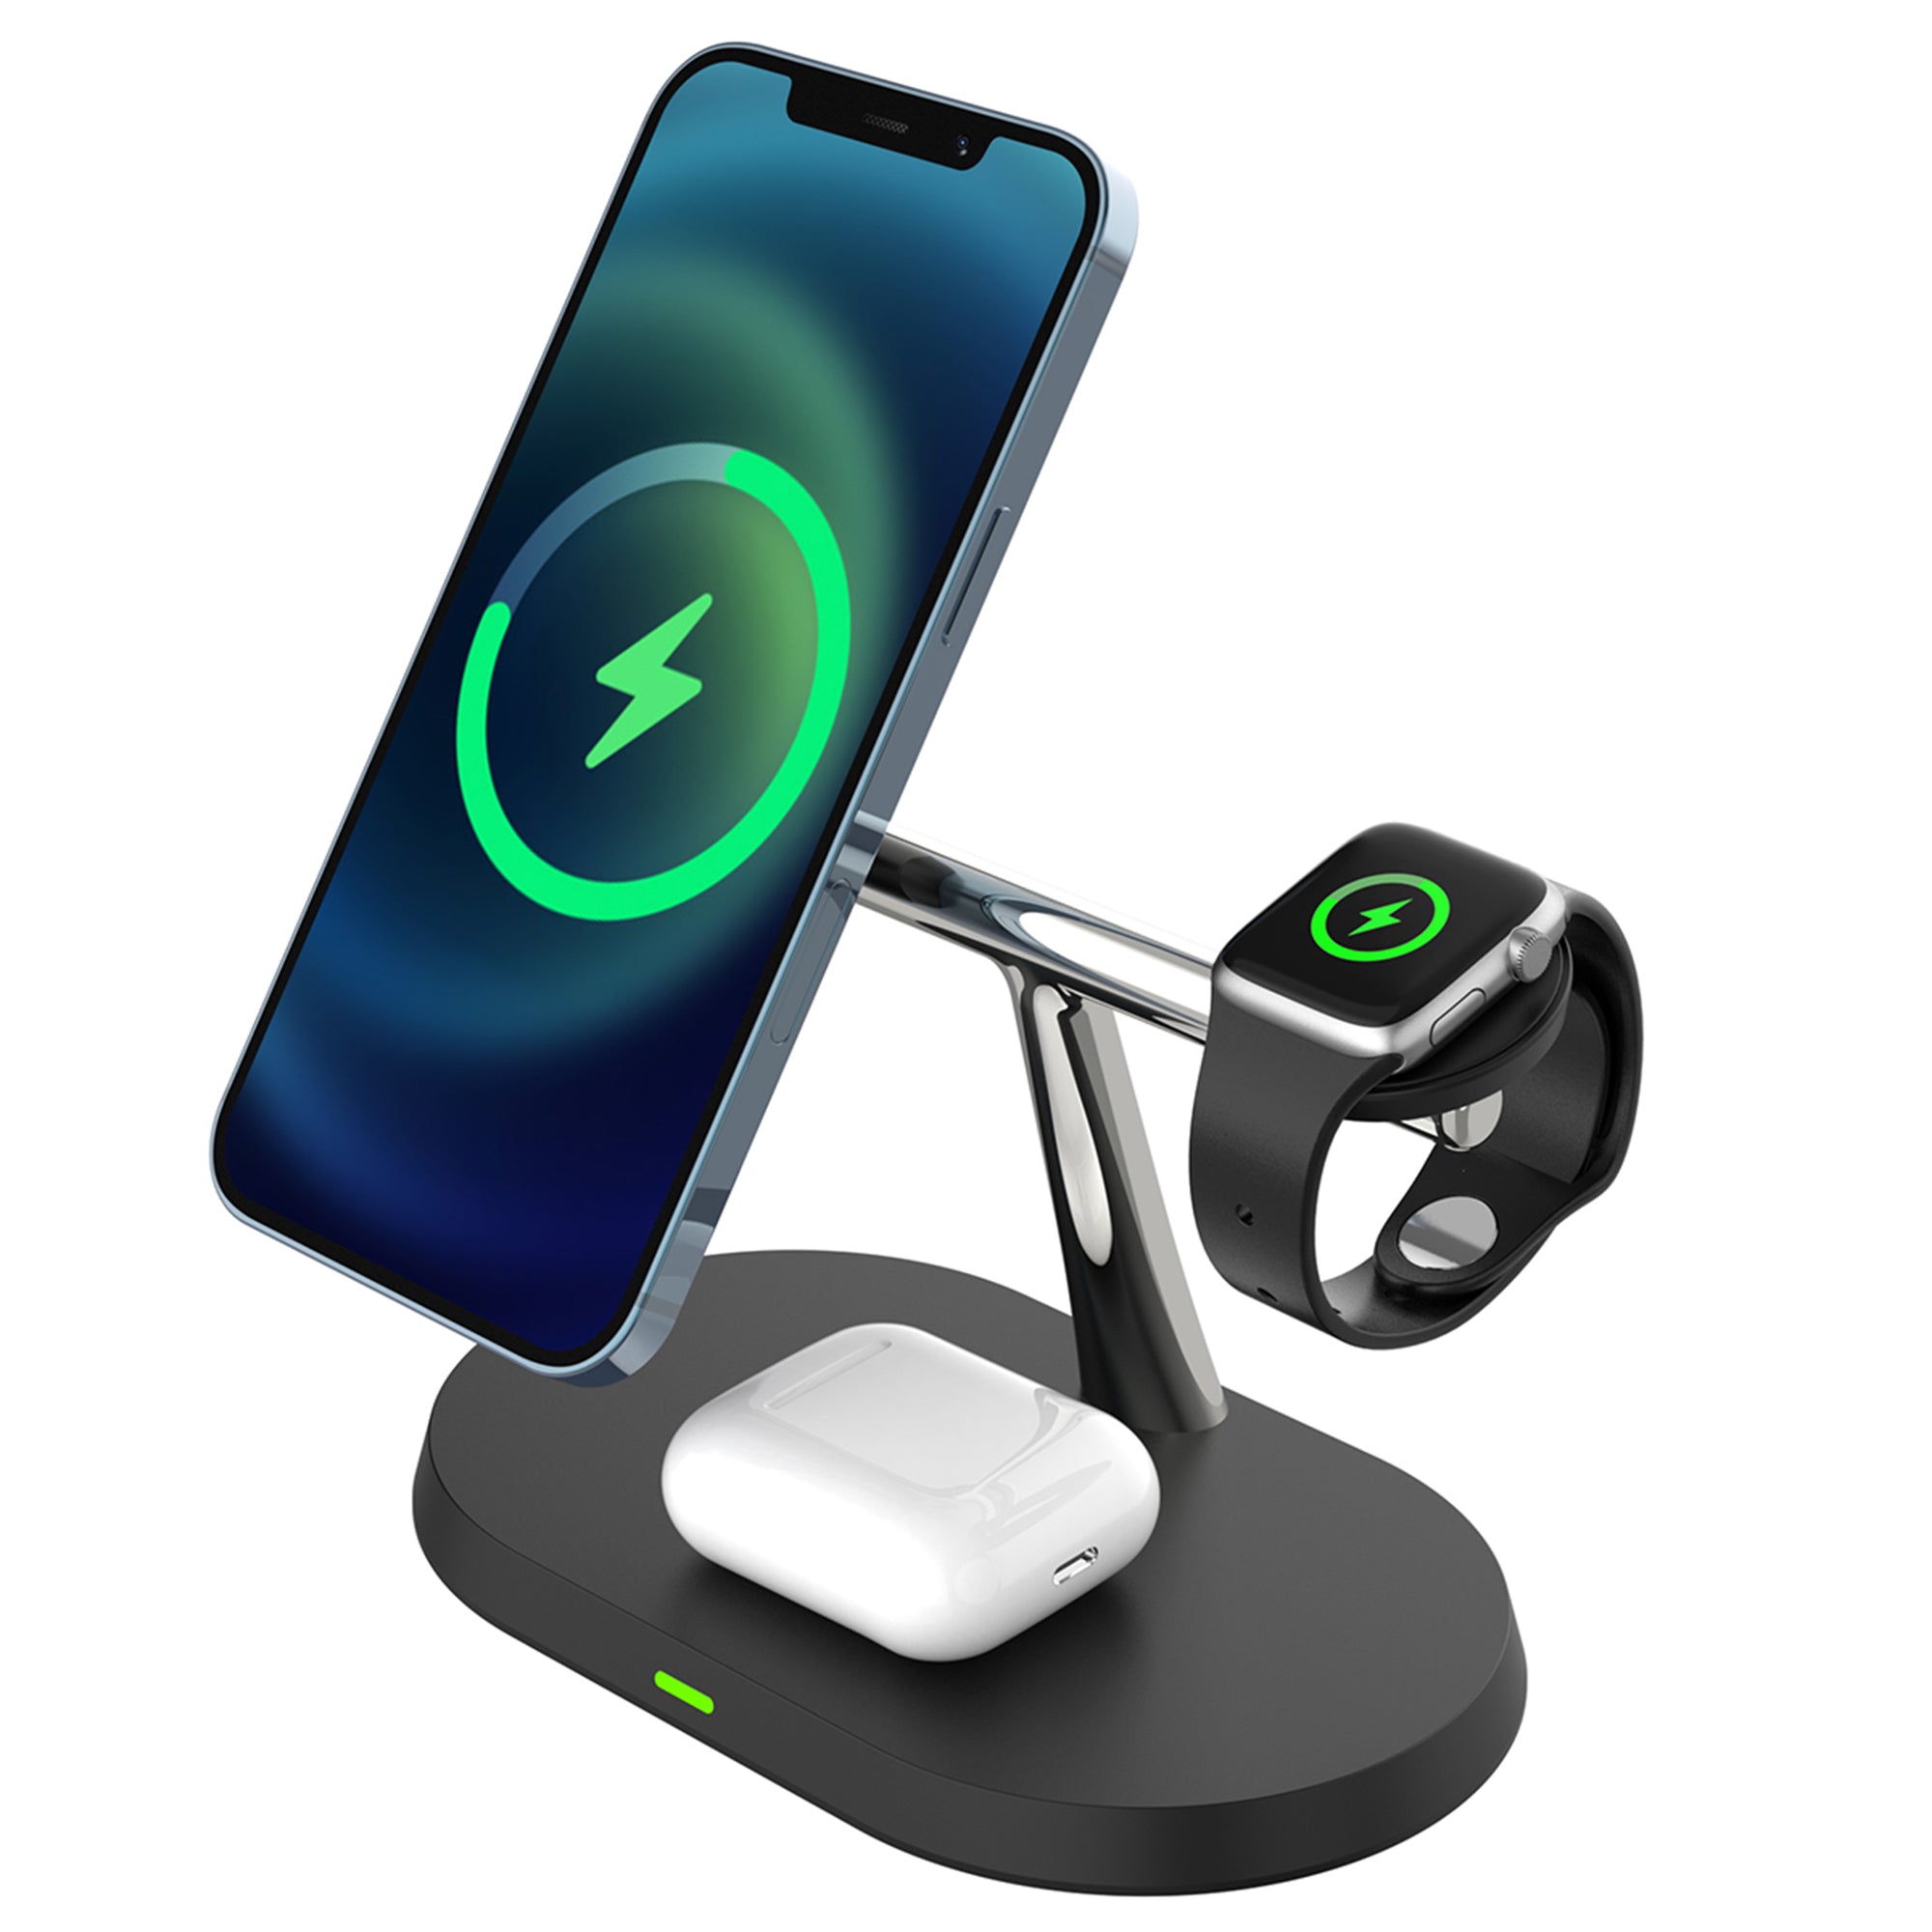 ZTECH Wireless Charging Stand for Phone, Watch, and Earbuds